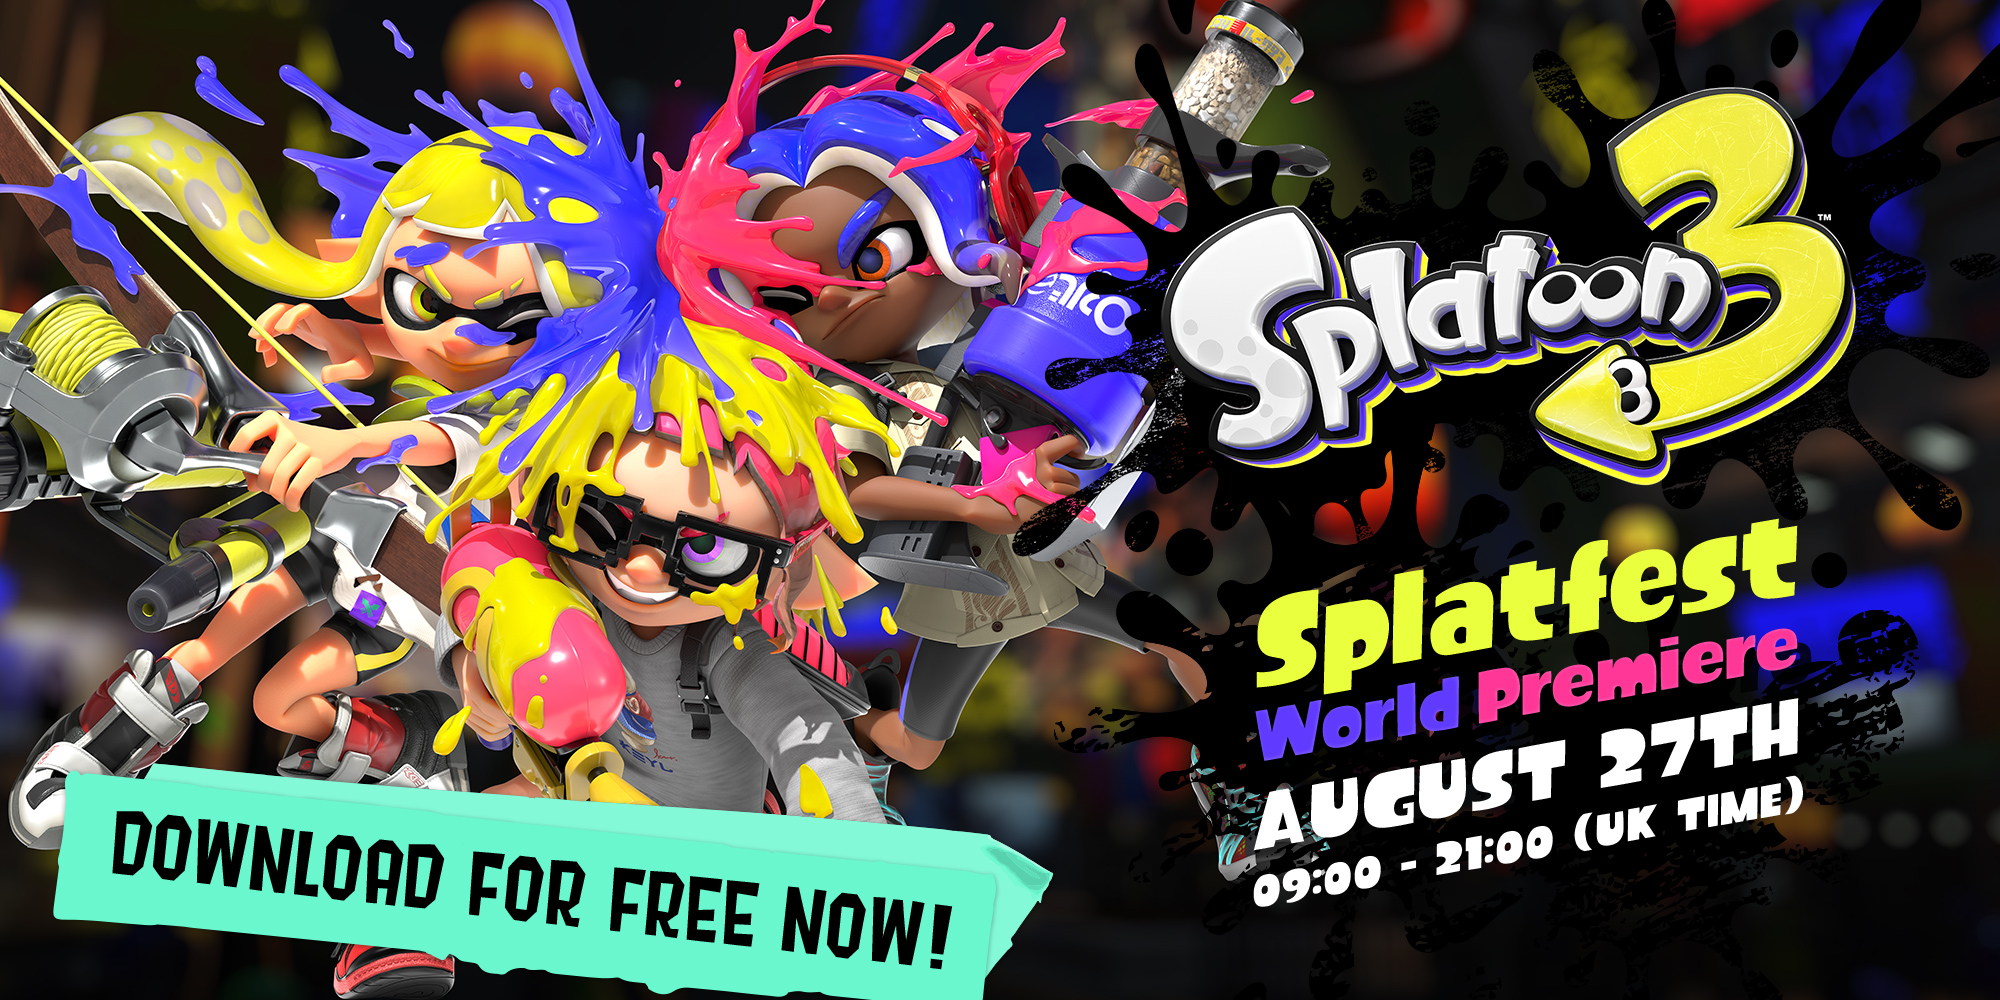 Try out the free Splatoon 3: Splatfest World Premiere demo now!